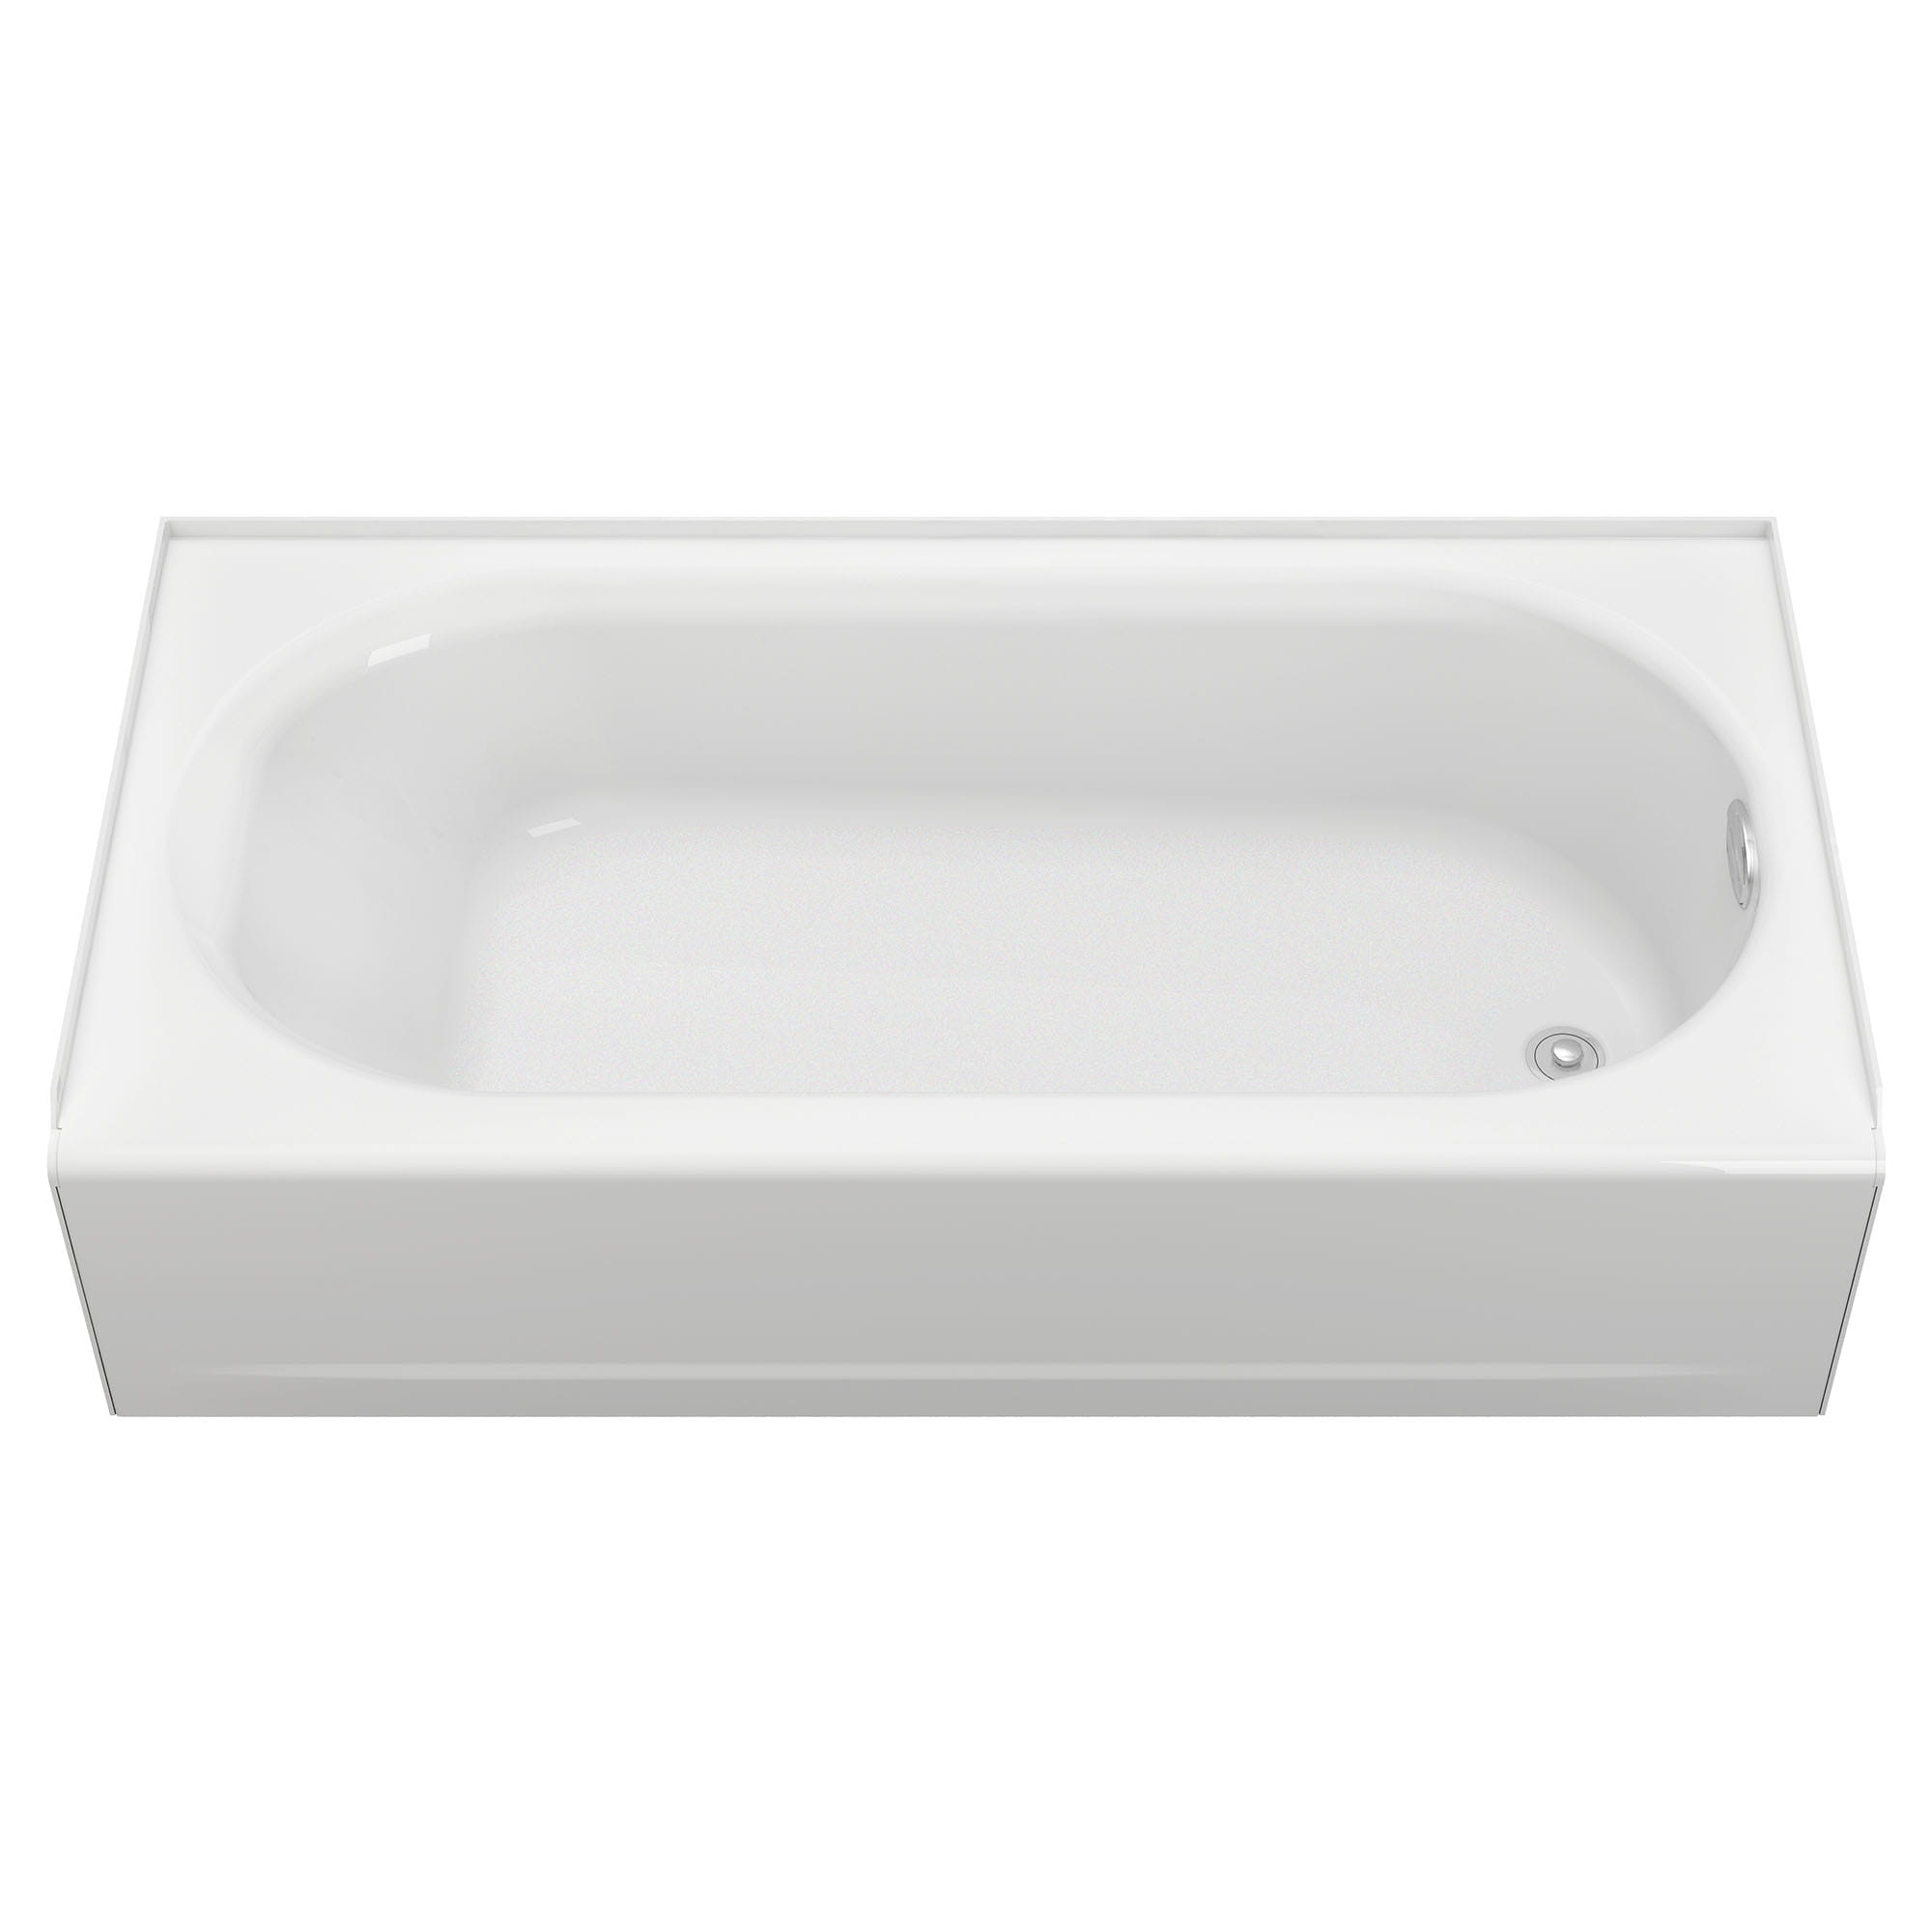 Princeton® Americast® 60 x 30-Inch Integral Apron Bathtub Above Floor Rough Right-Hand Outlet with Integral Drain